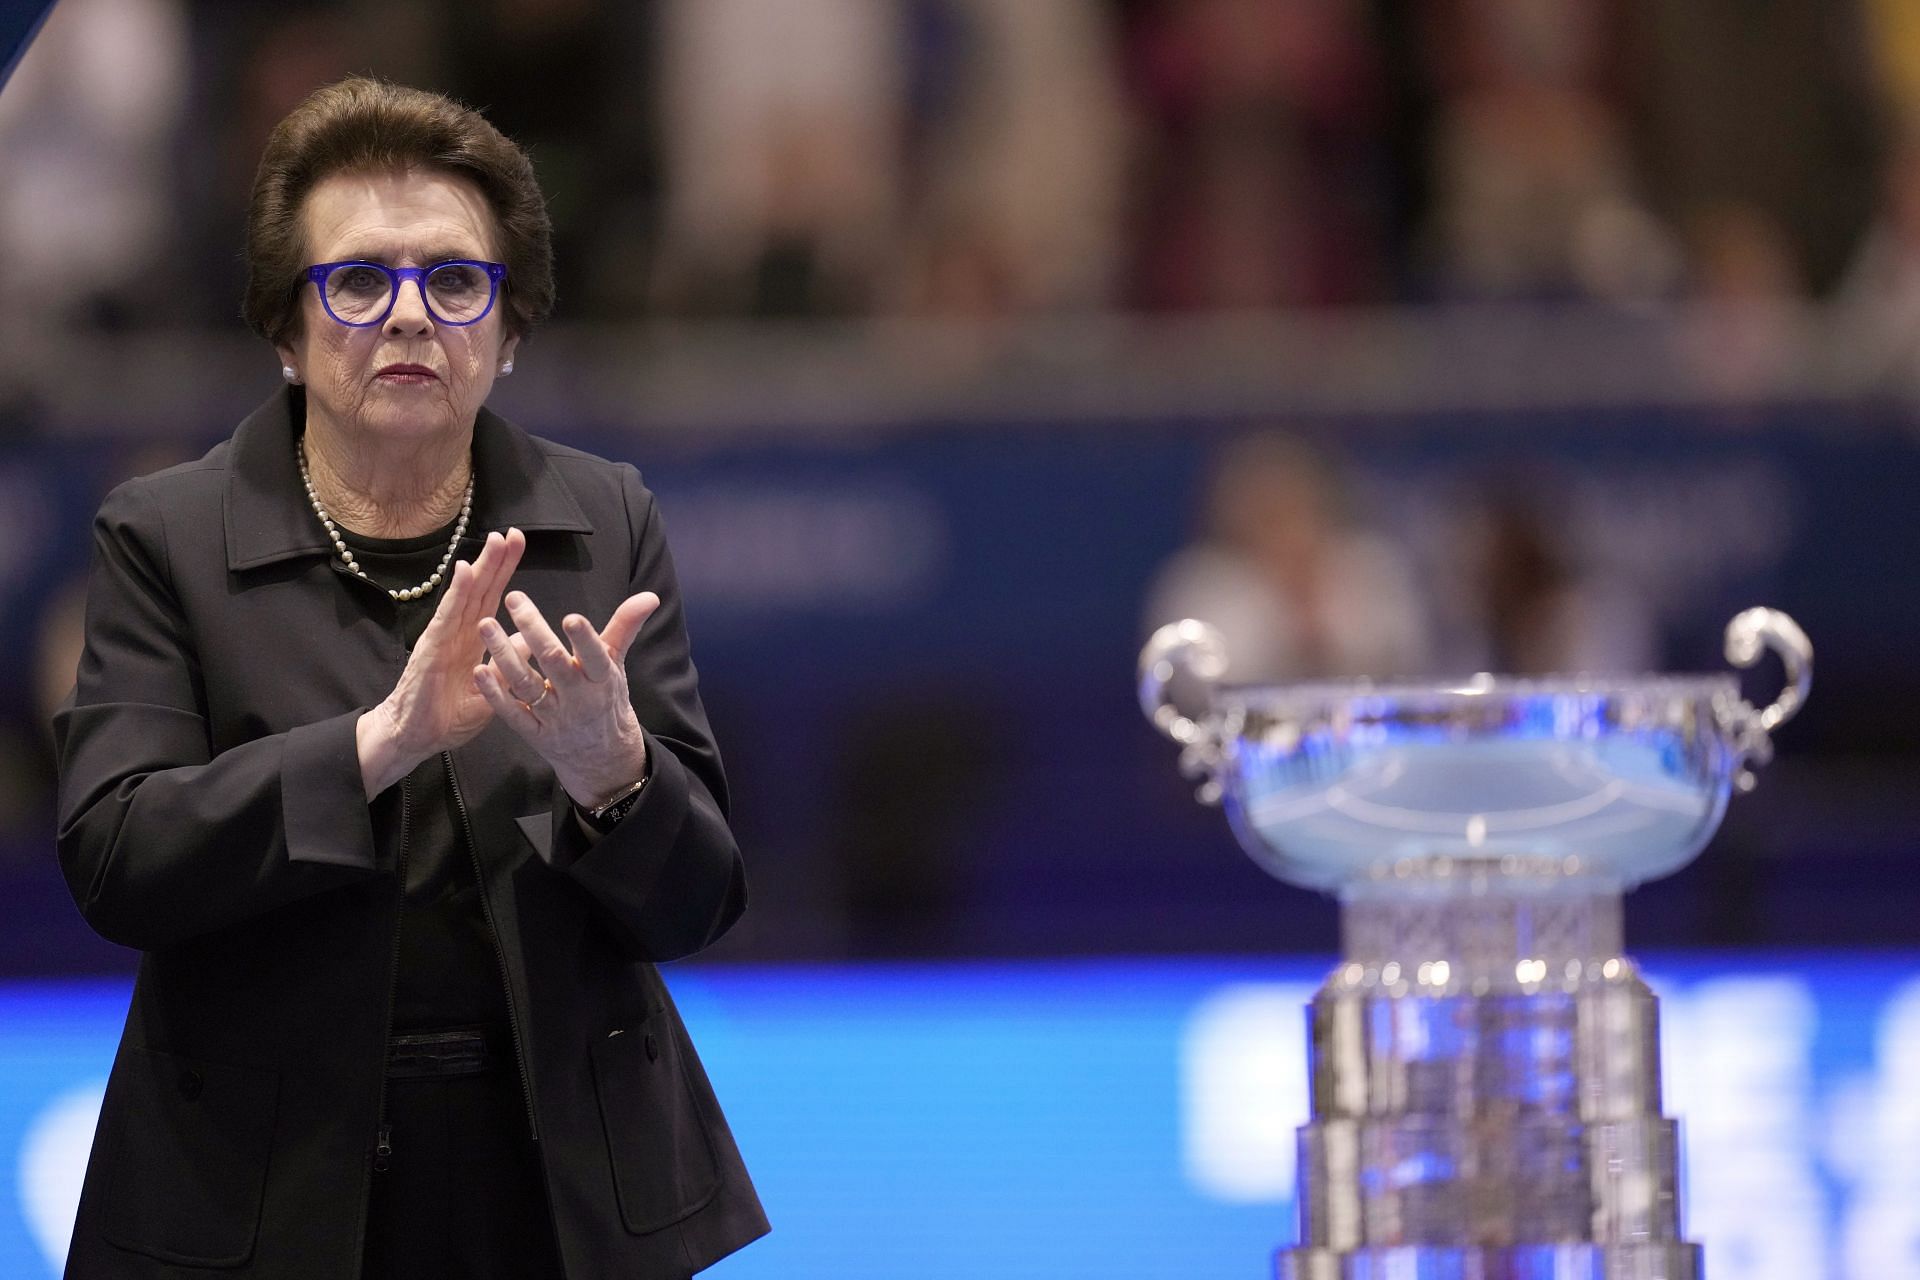 Billie Jean King pictured at the BJK Cup Finals